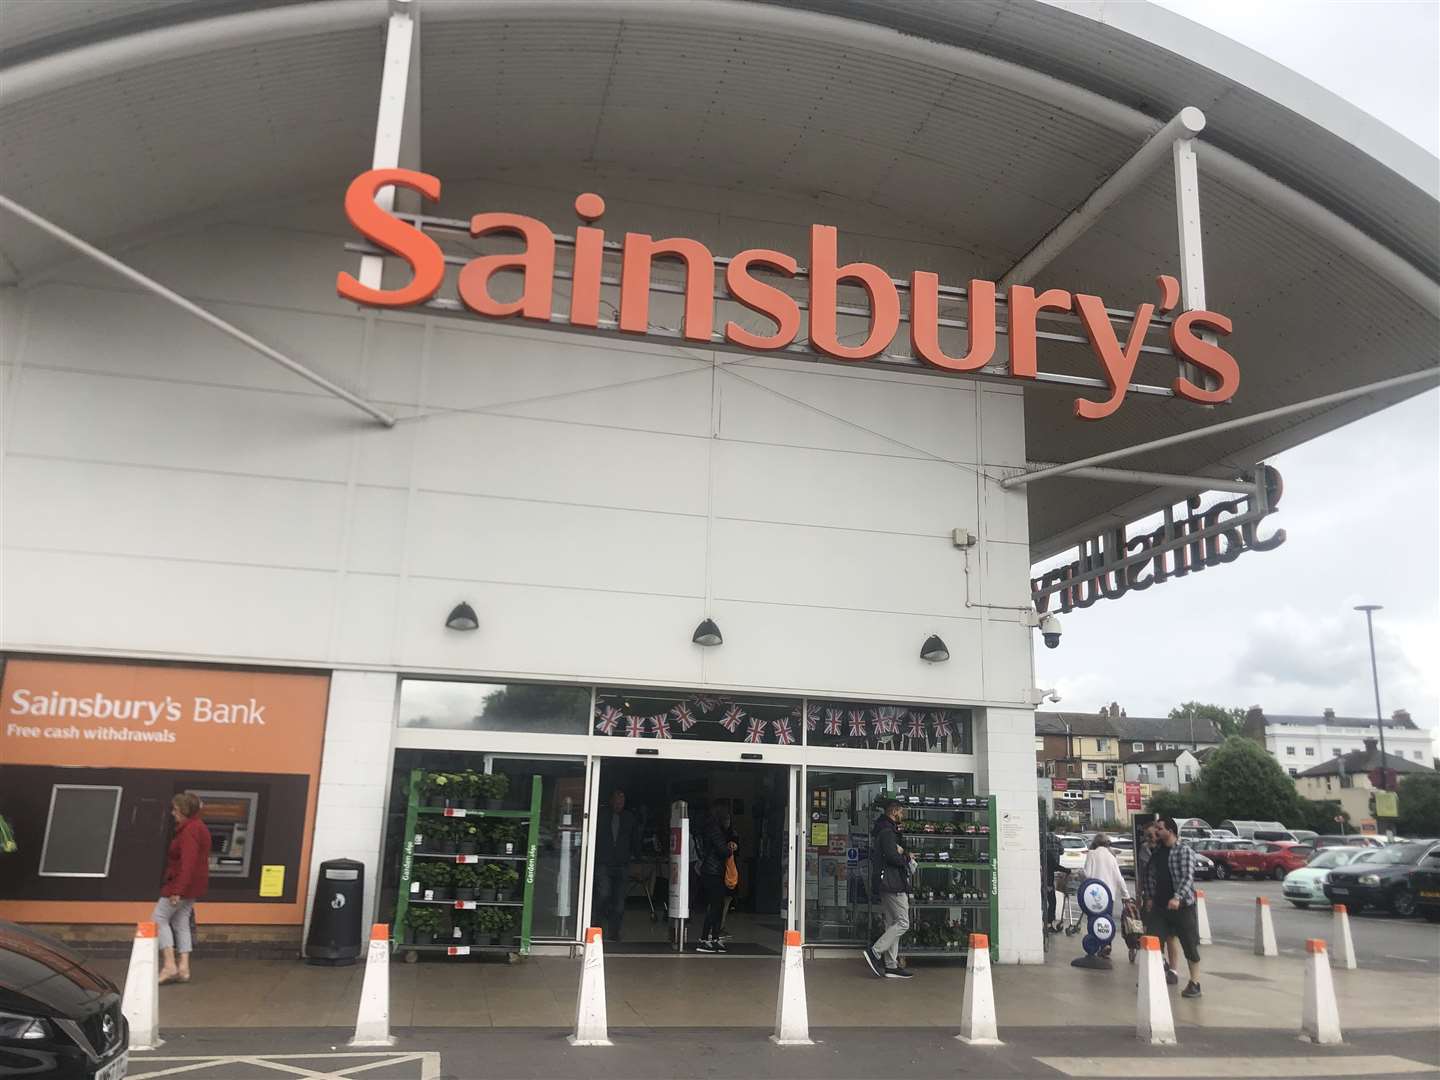 Sainsbury's in Maidstone has replaced almost all of its manned tills with self-checkout machines